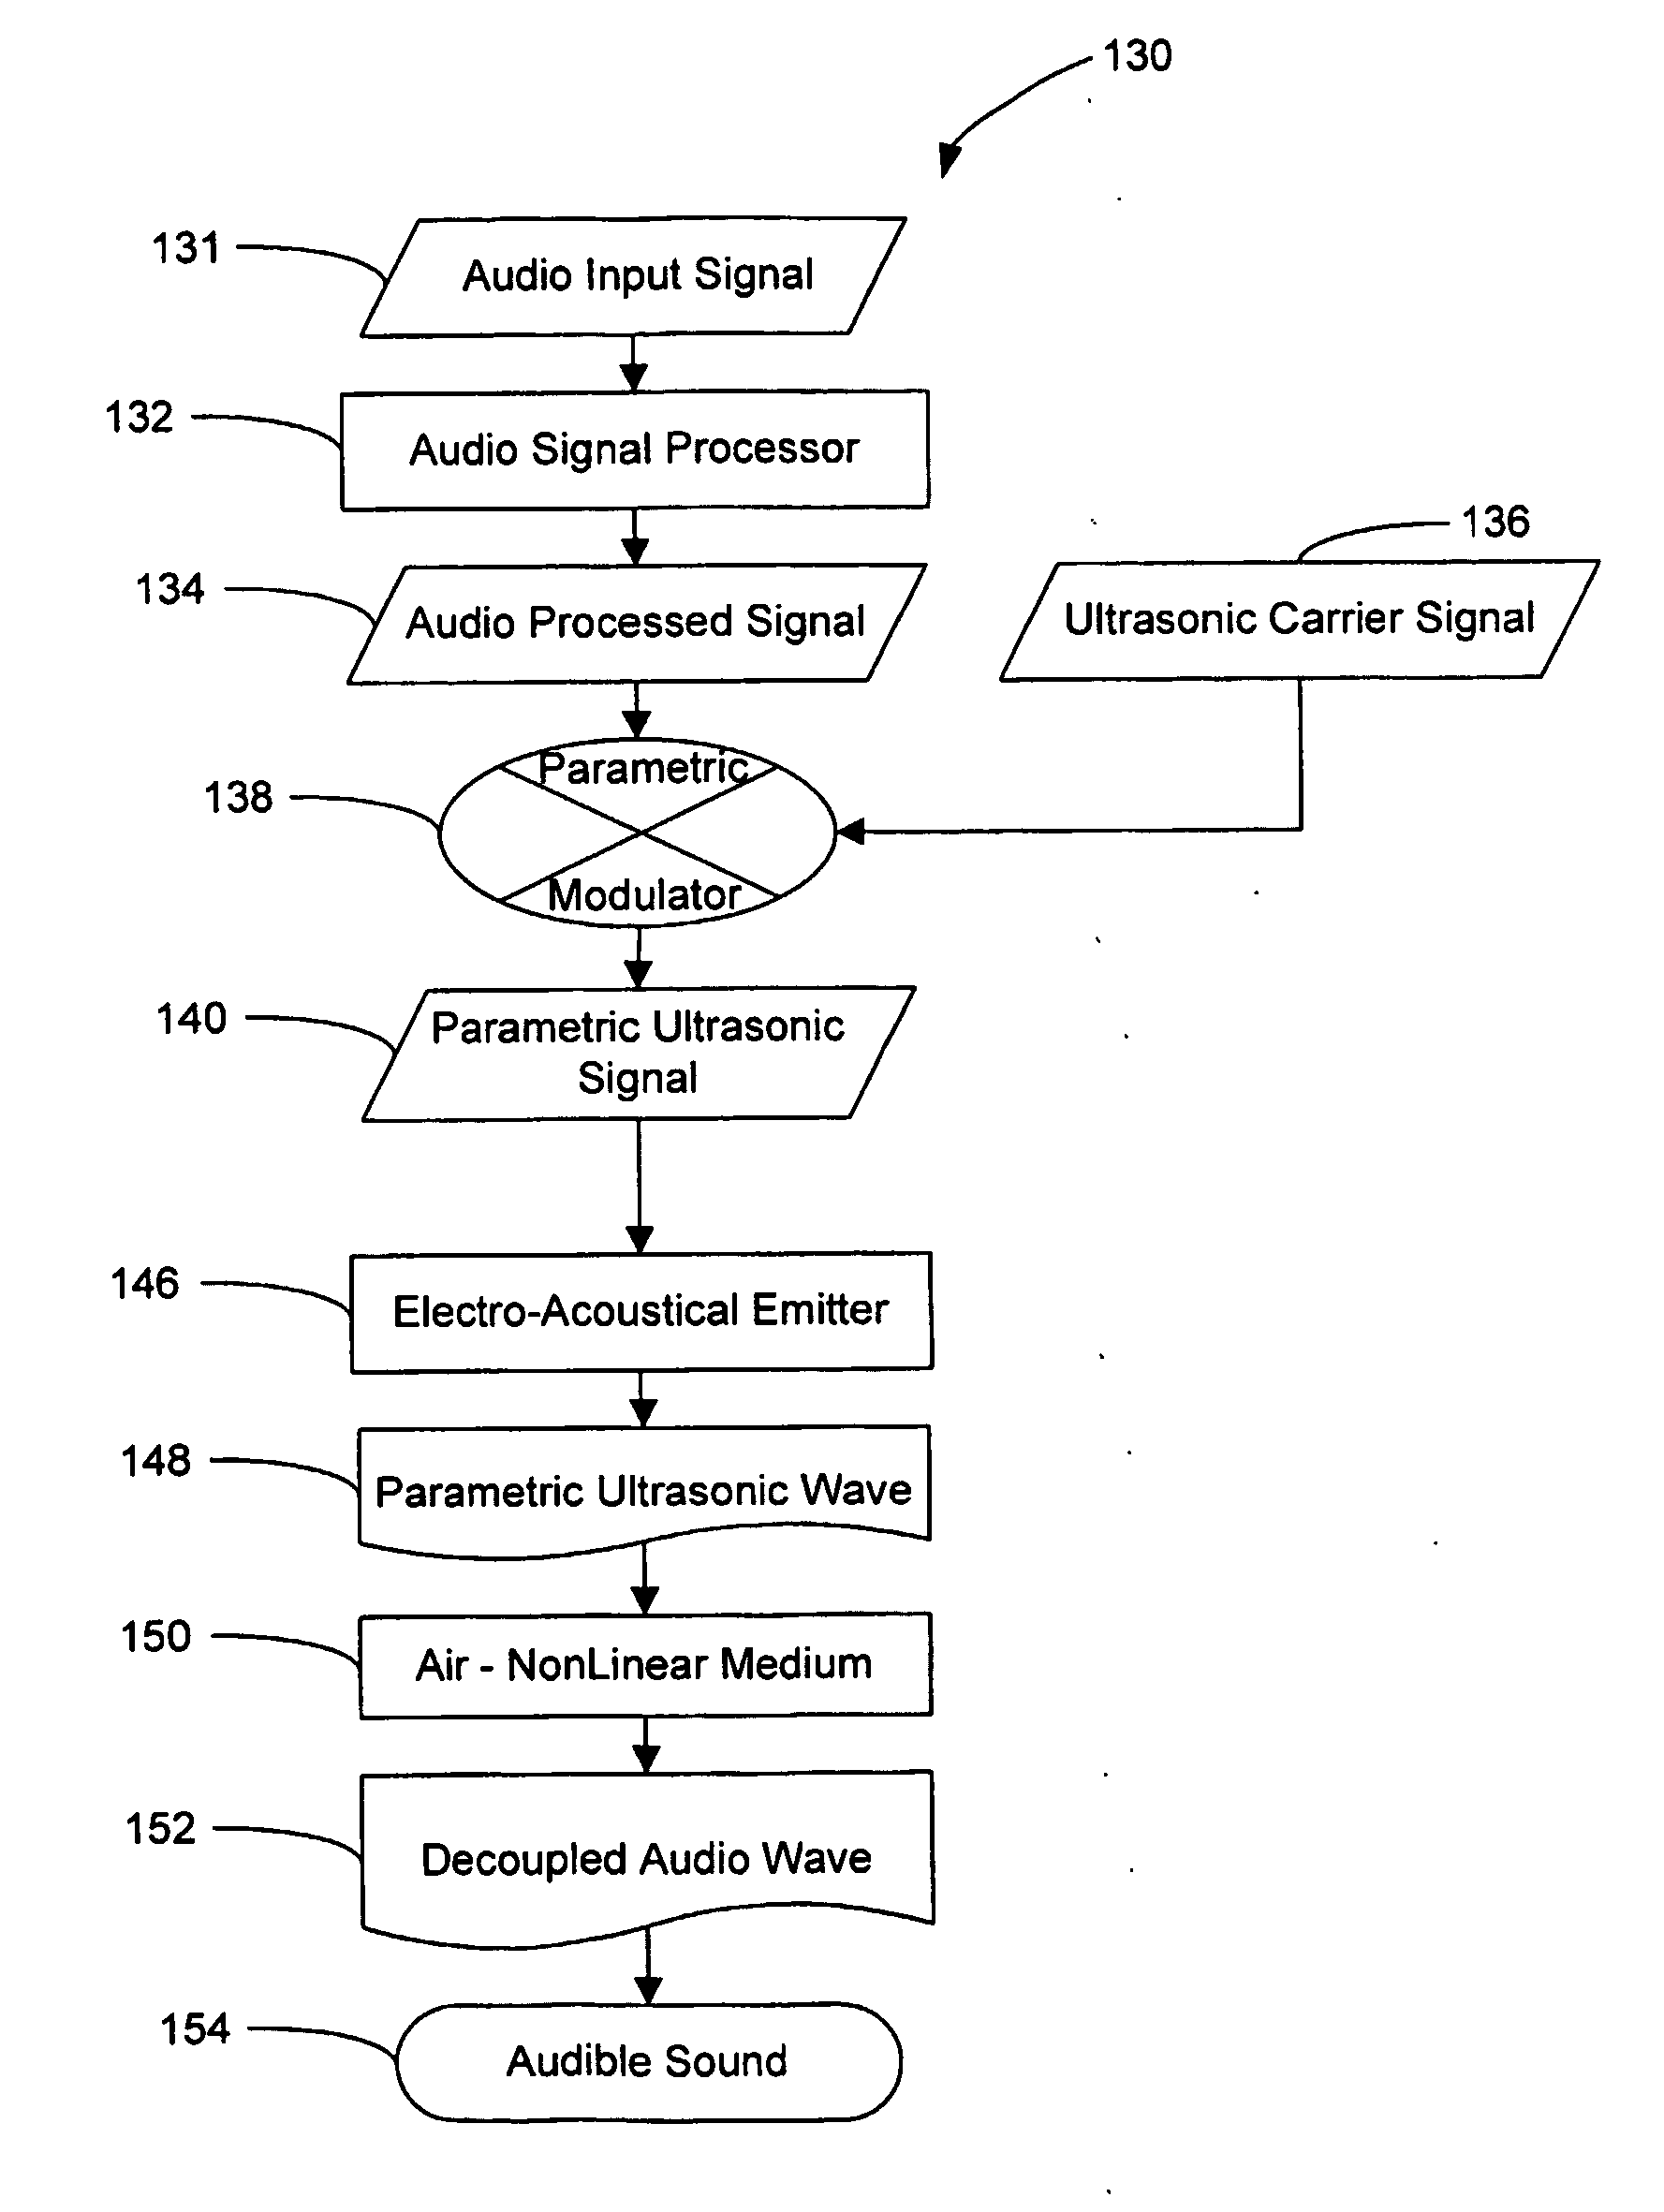 Parametric Loudspeaker System And Method For Enabling Isolated Listening To Audio Material